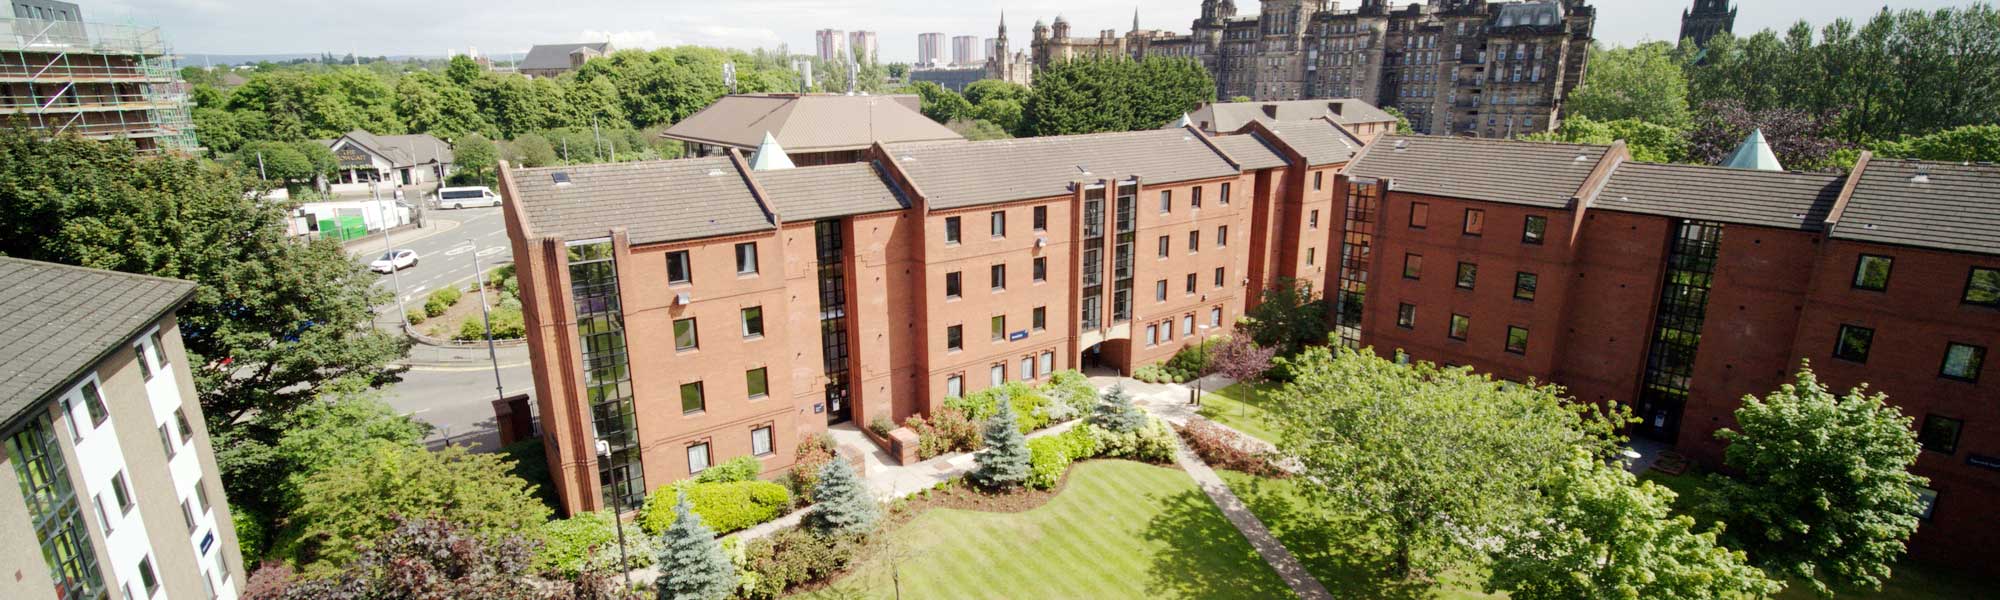 Exterior of student accommodation.